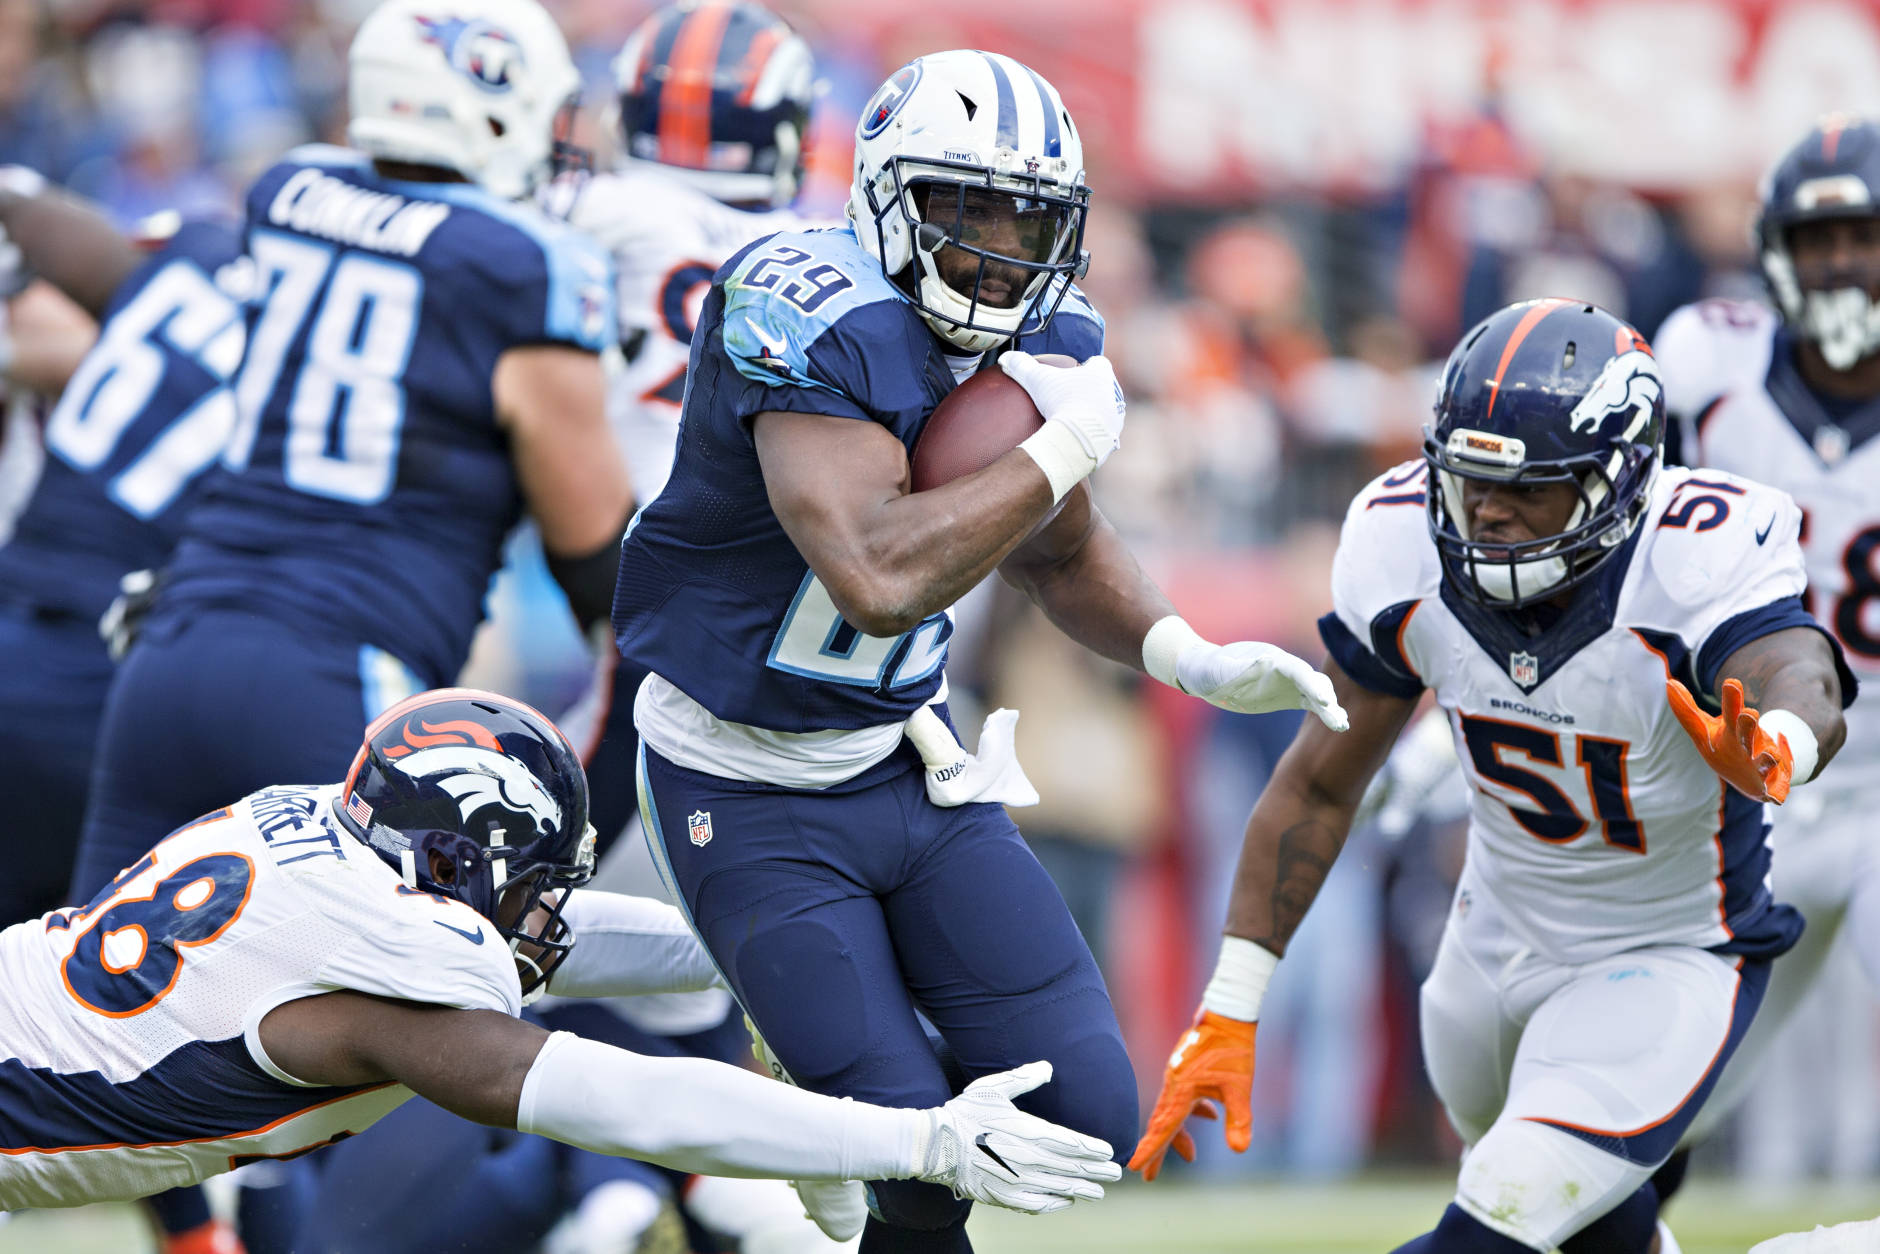 NASHVILLE, TN - DECEMBER 11:  DeMarco Murray #29 of the Tennessee Titans is tackled by Shaquil Barrett #48 of the Denver Broncos at Nissan Stadium on December 11, 2016 in Nashville, Tennessee.  (Photo by Wesley Hitt/Getty Images)